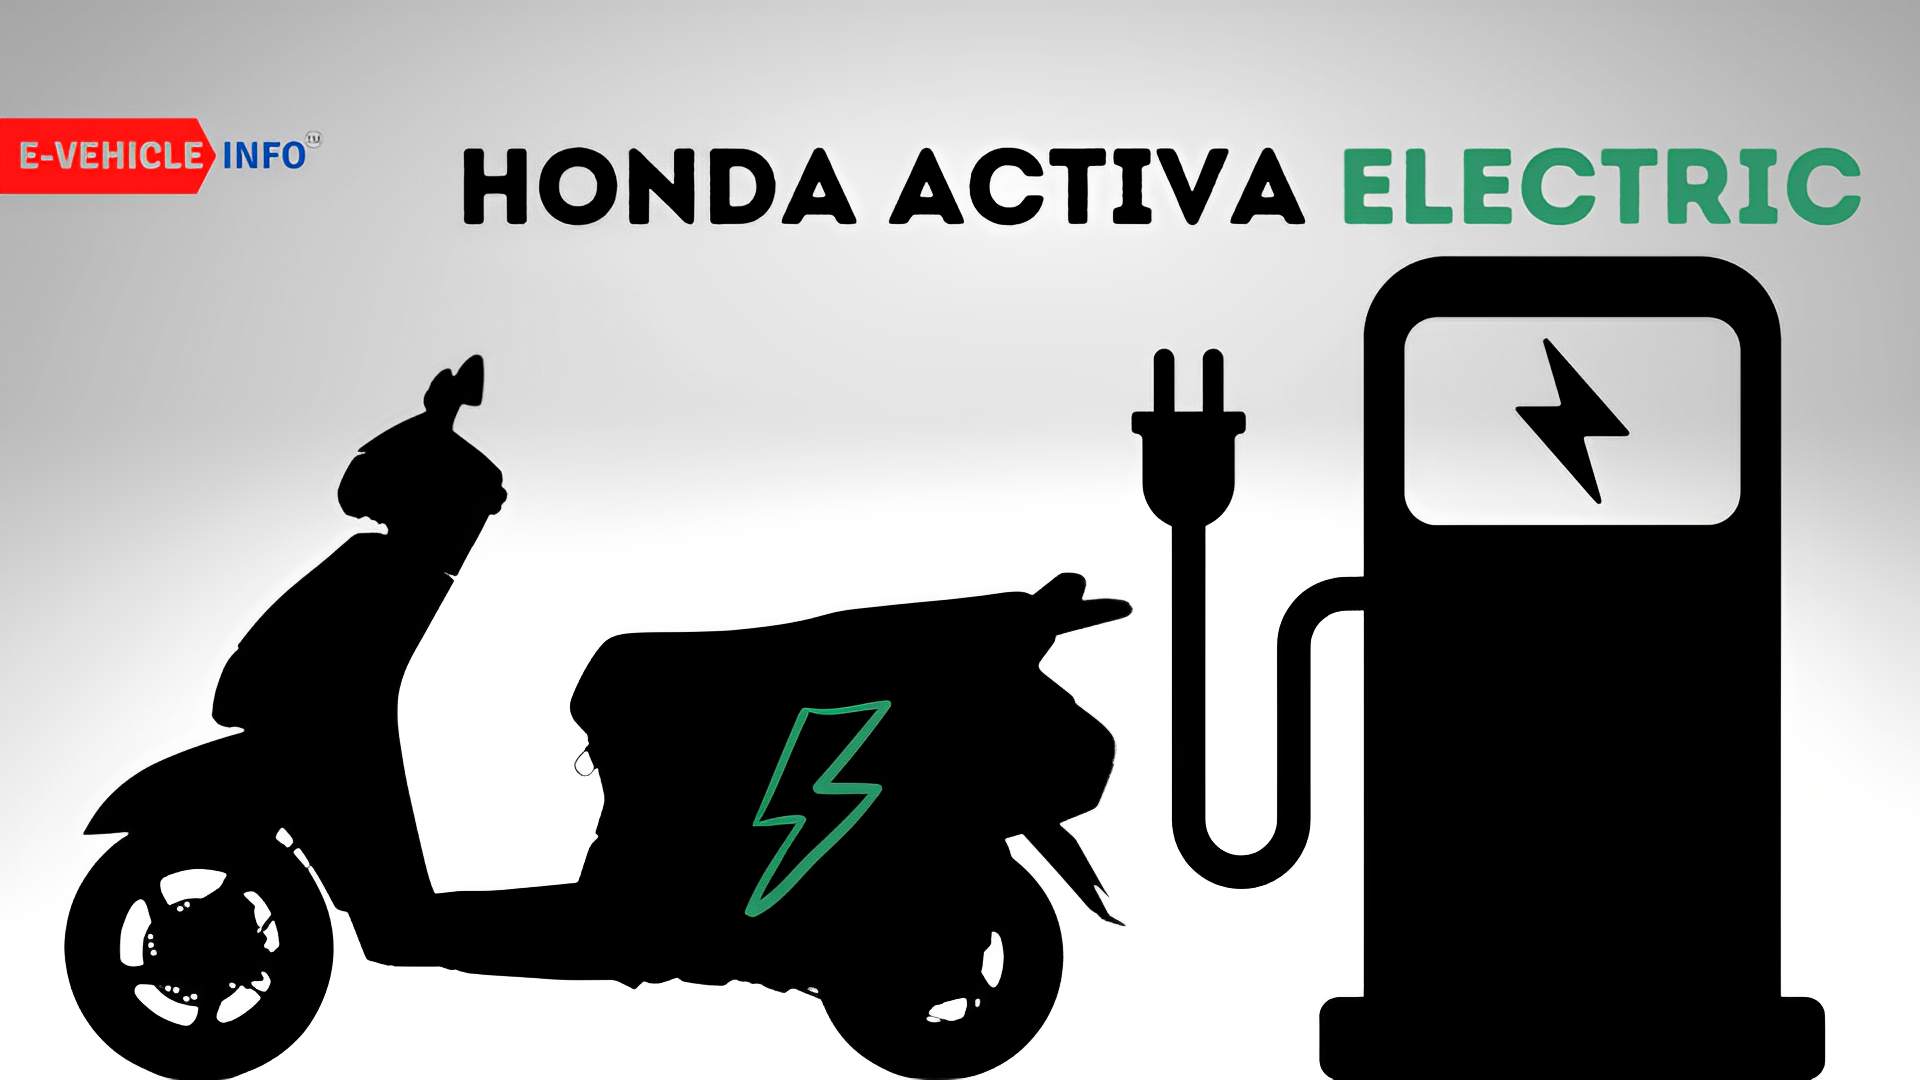 The Honda Activa Electric will be launched by 2024